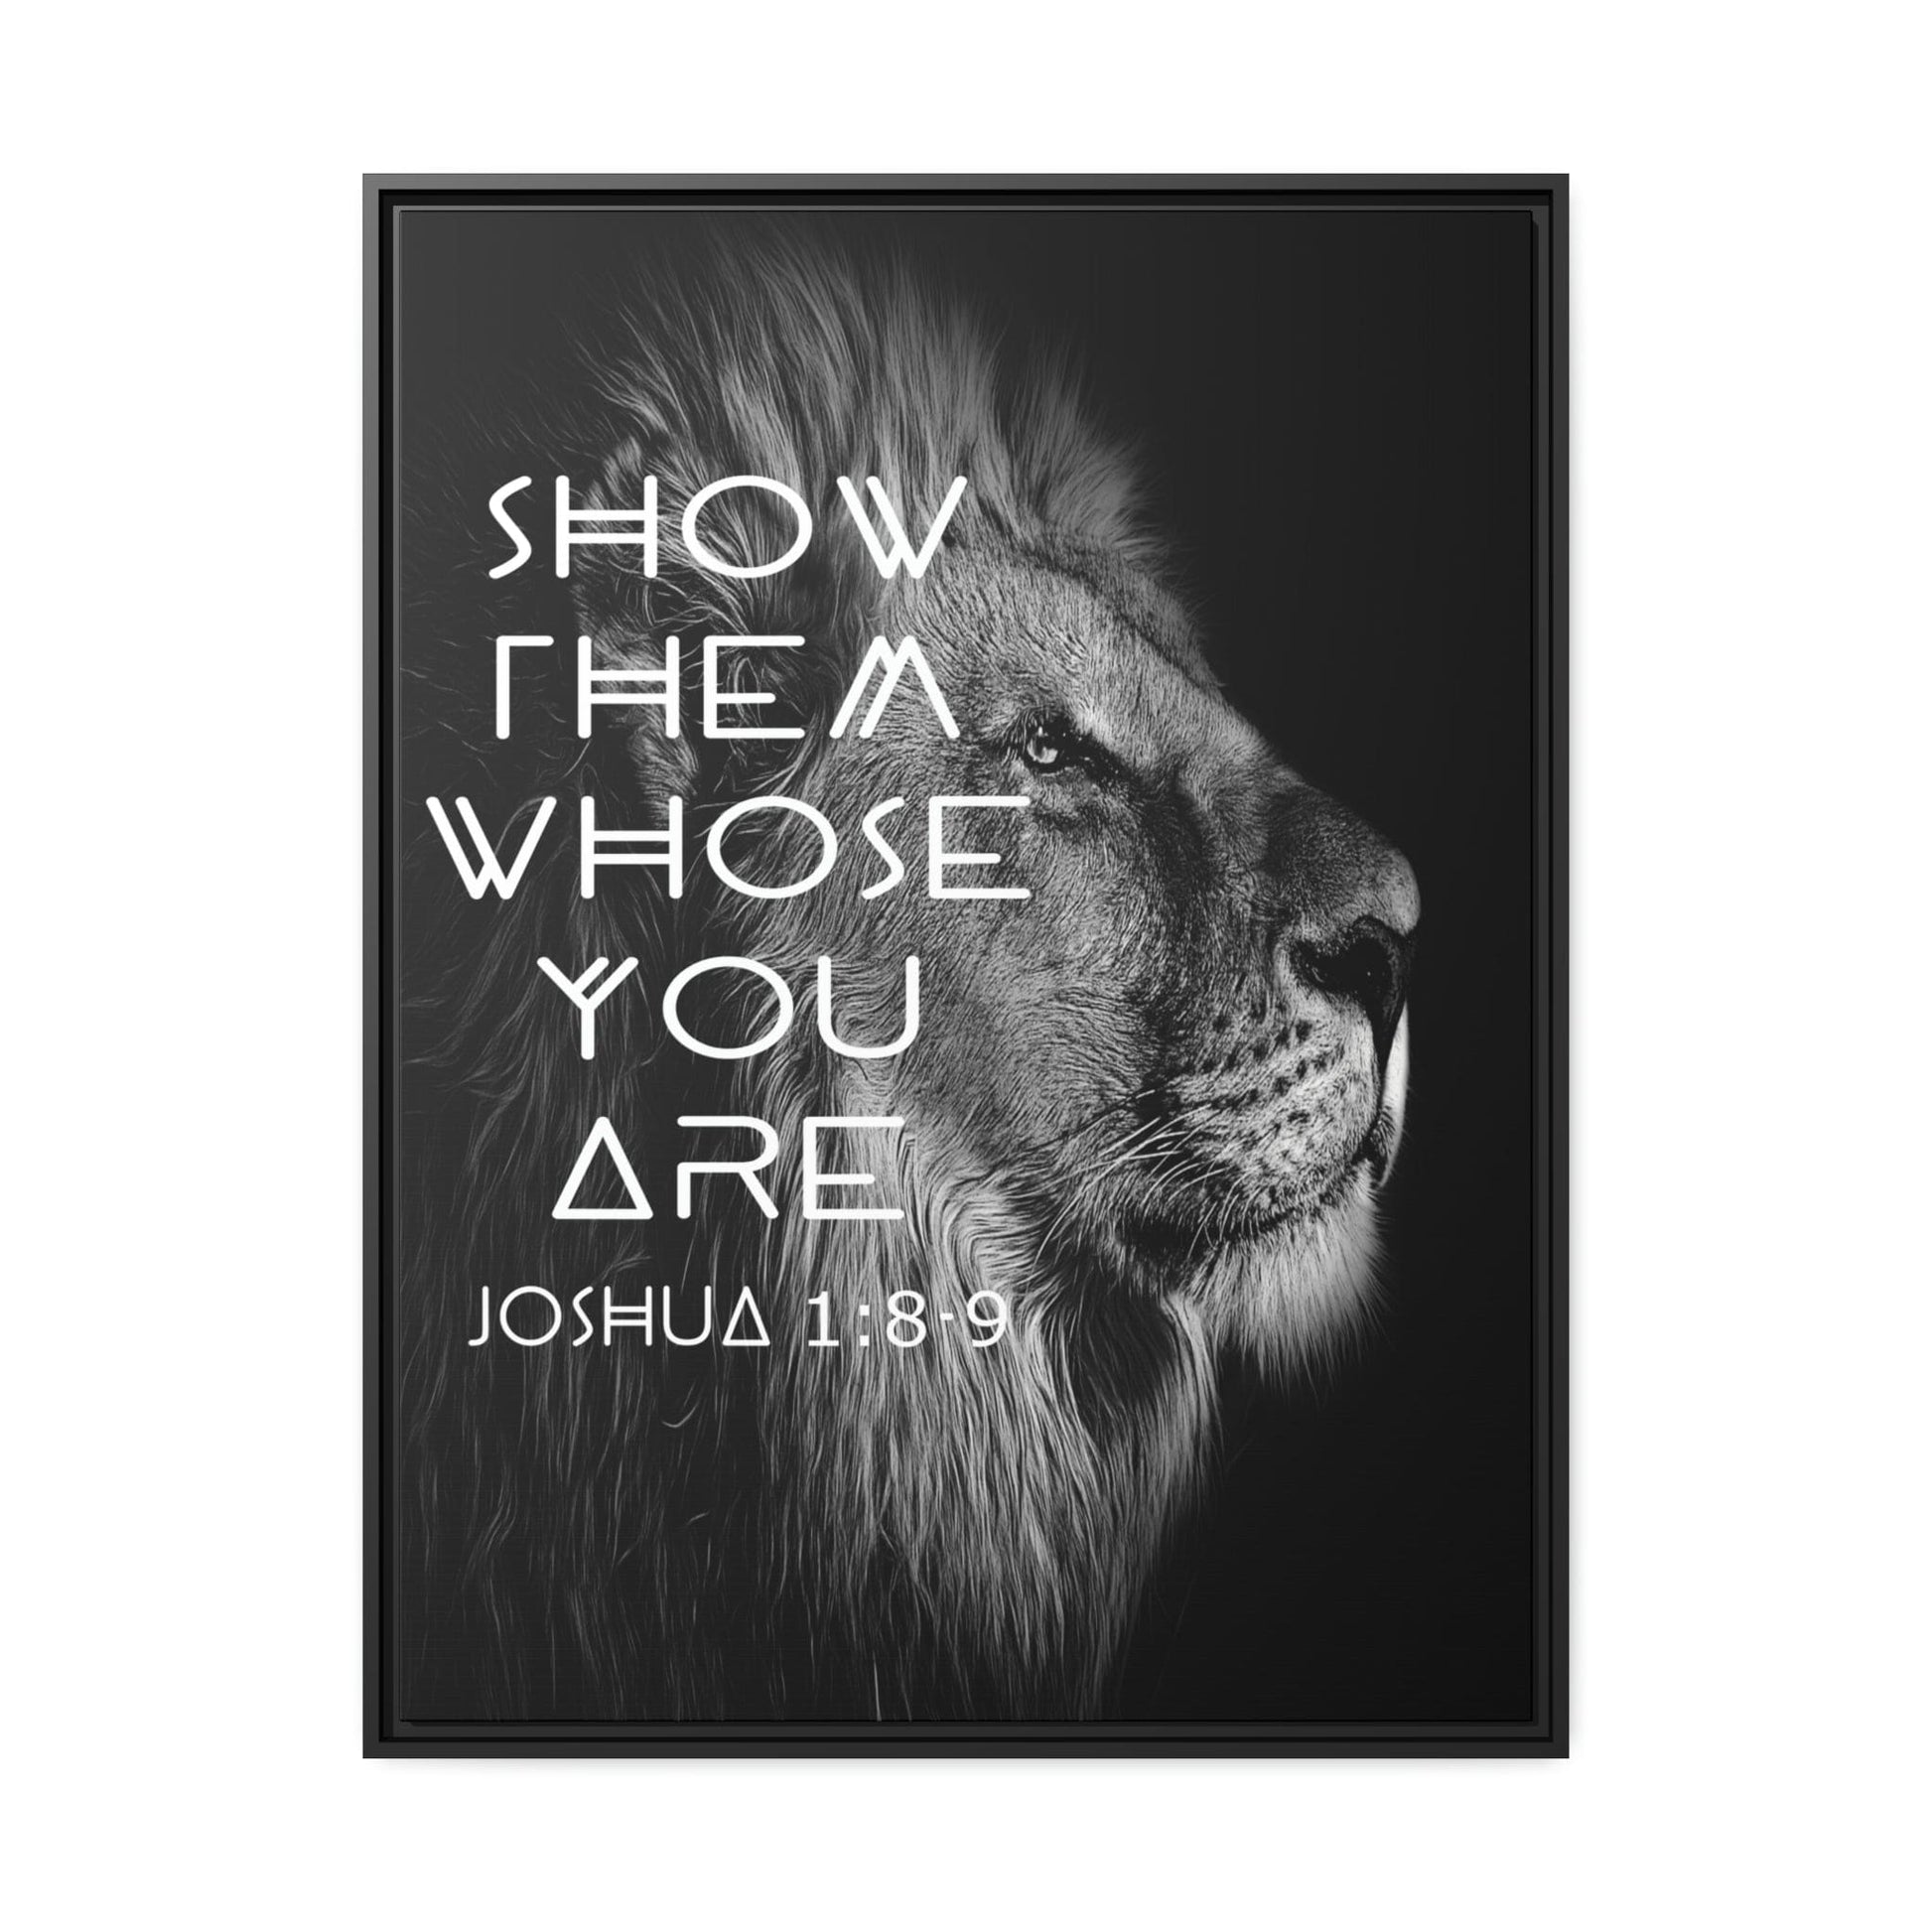 Printify Canvas 30" x 40" (Vertical) / Black / 1.25" Show Them Whose You Are - Joshua 1:8-9 Christian Canvas Wall Art